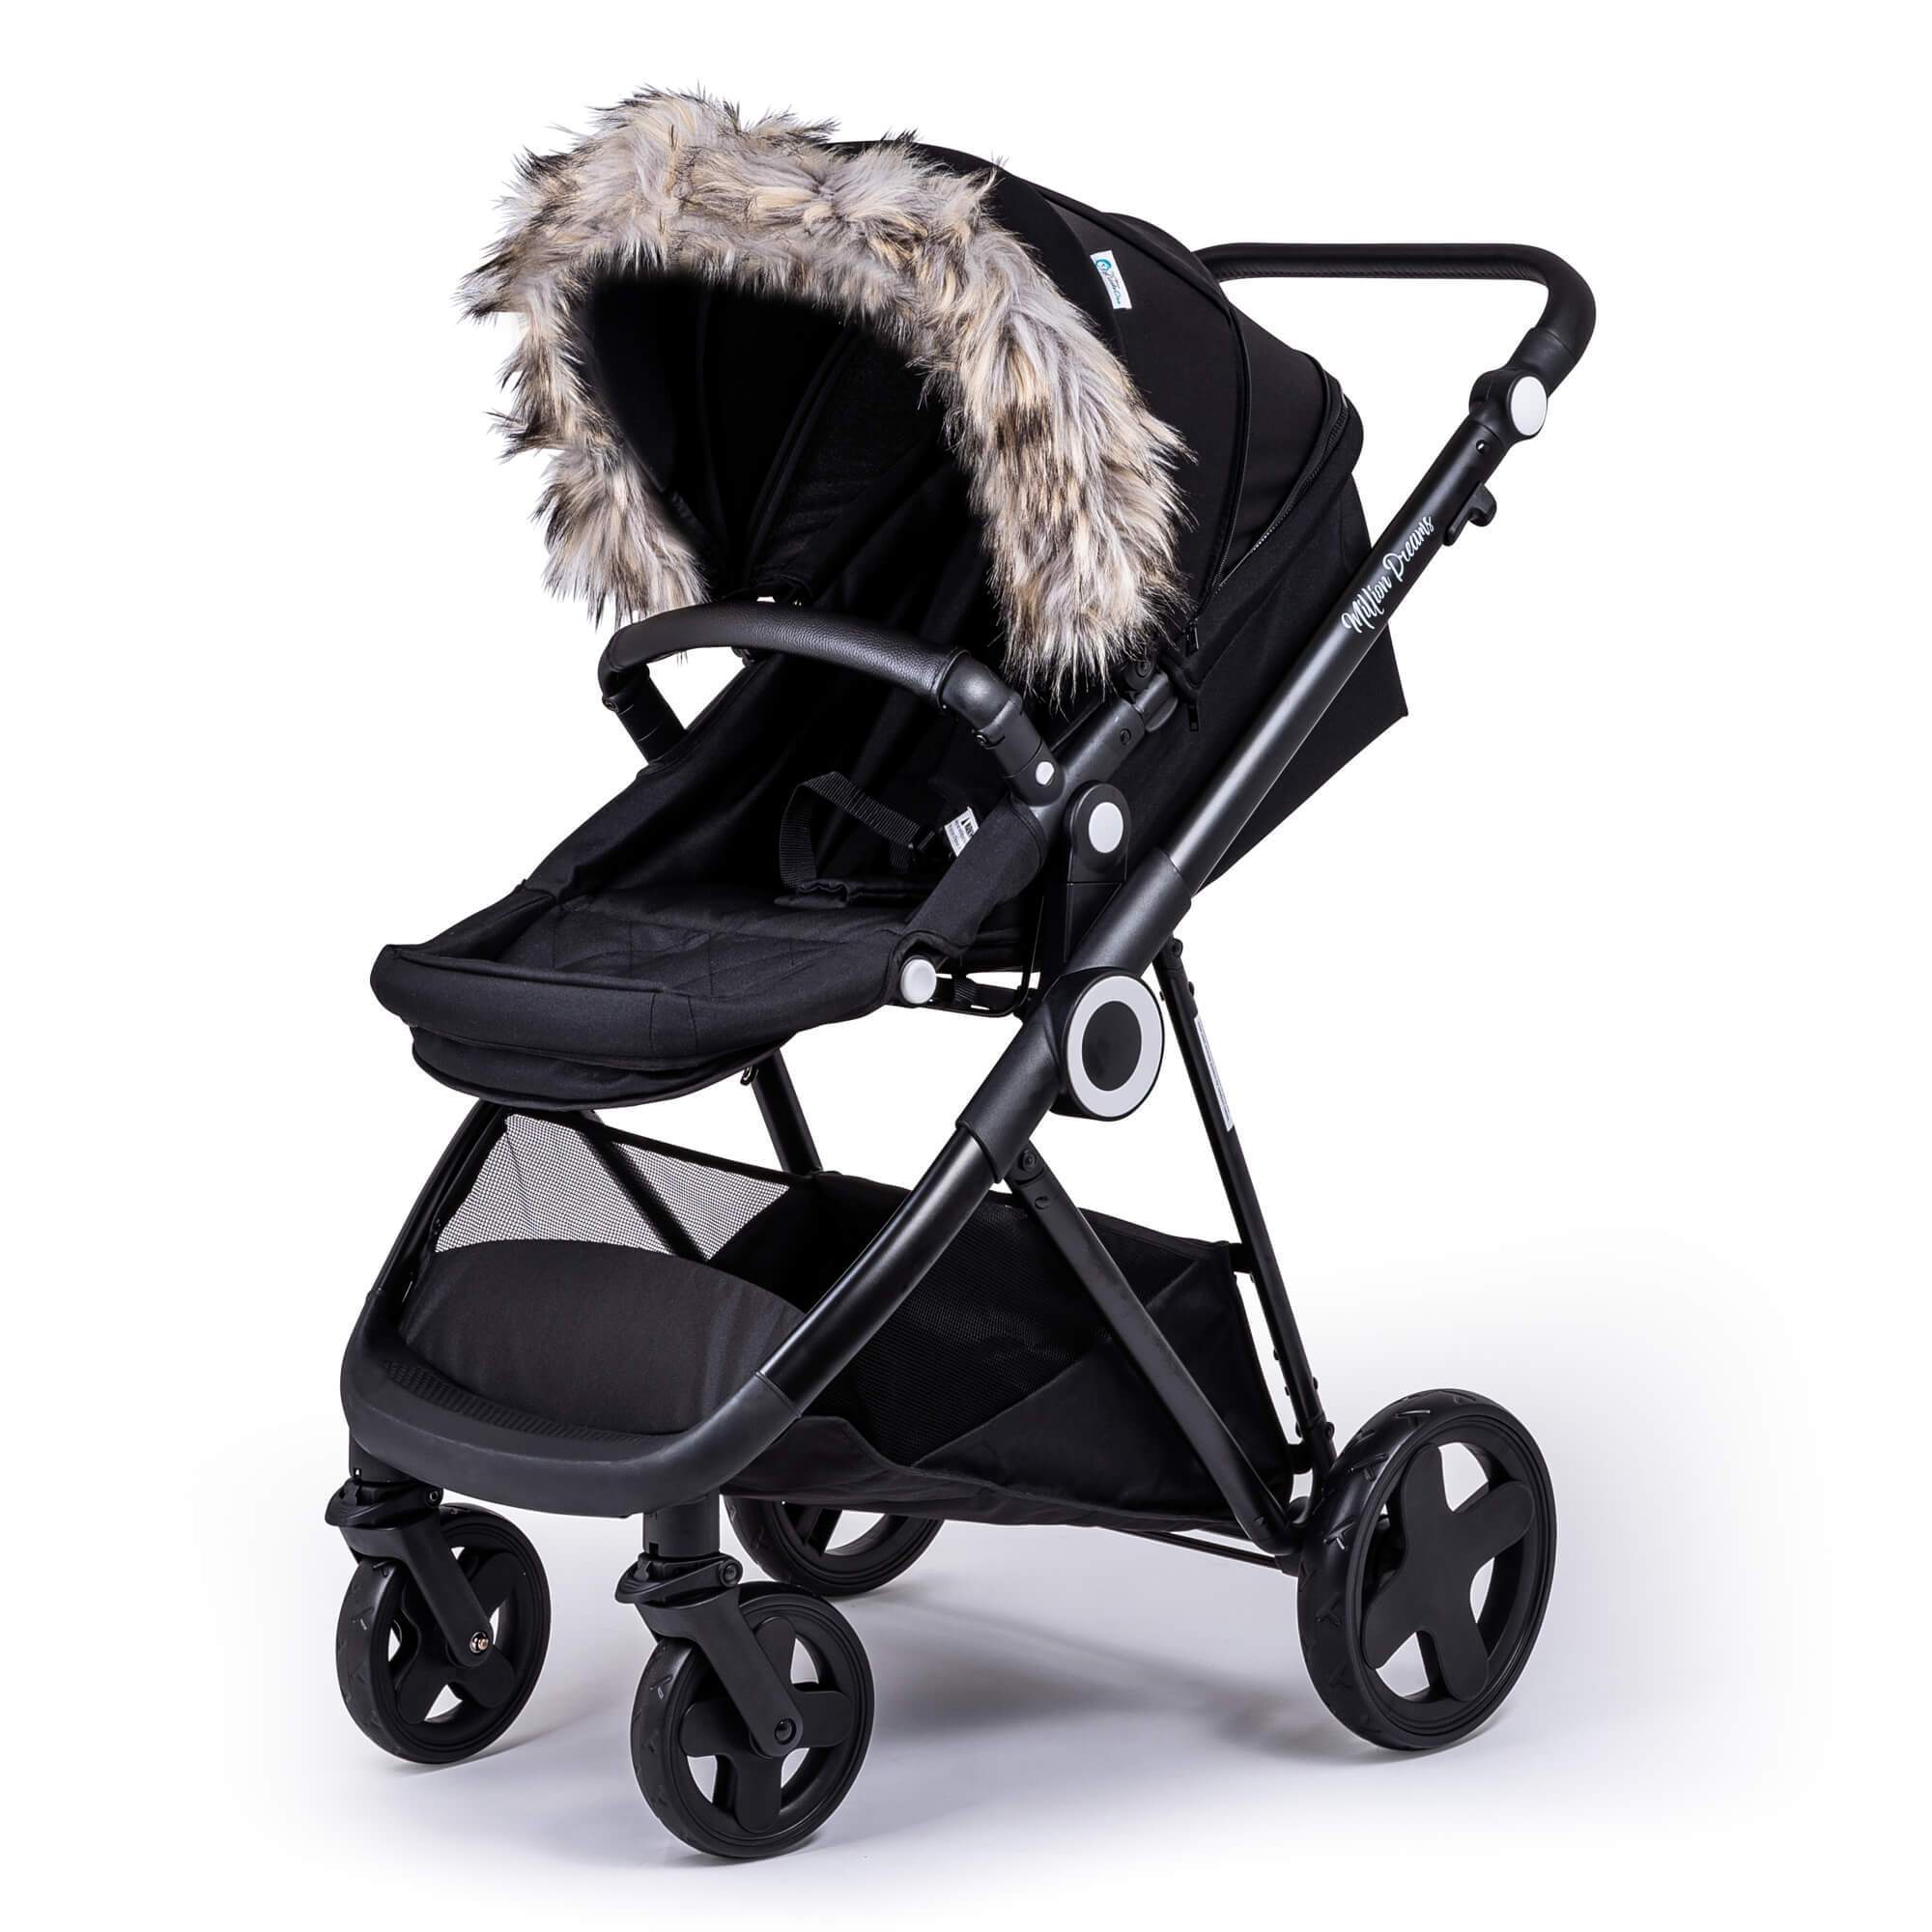 Pram Fur Hood Trim Attachment For Pushchair Compatible with My Child - Light Grey / Fits All Models | For Your Little One